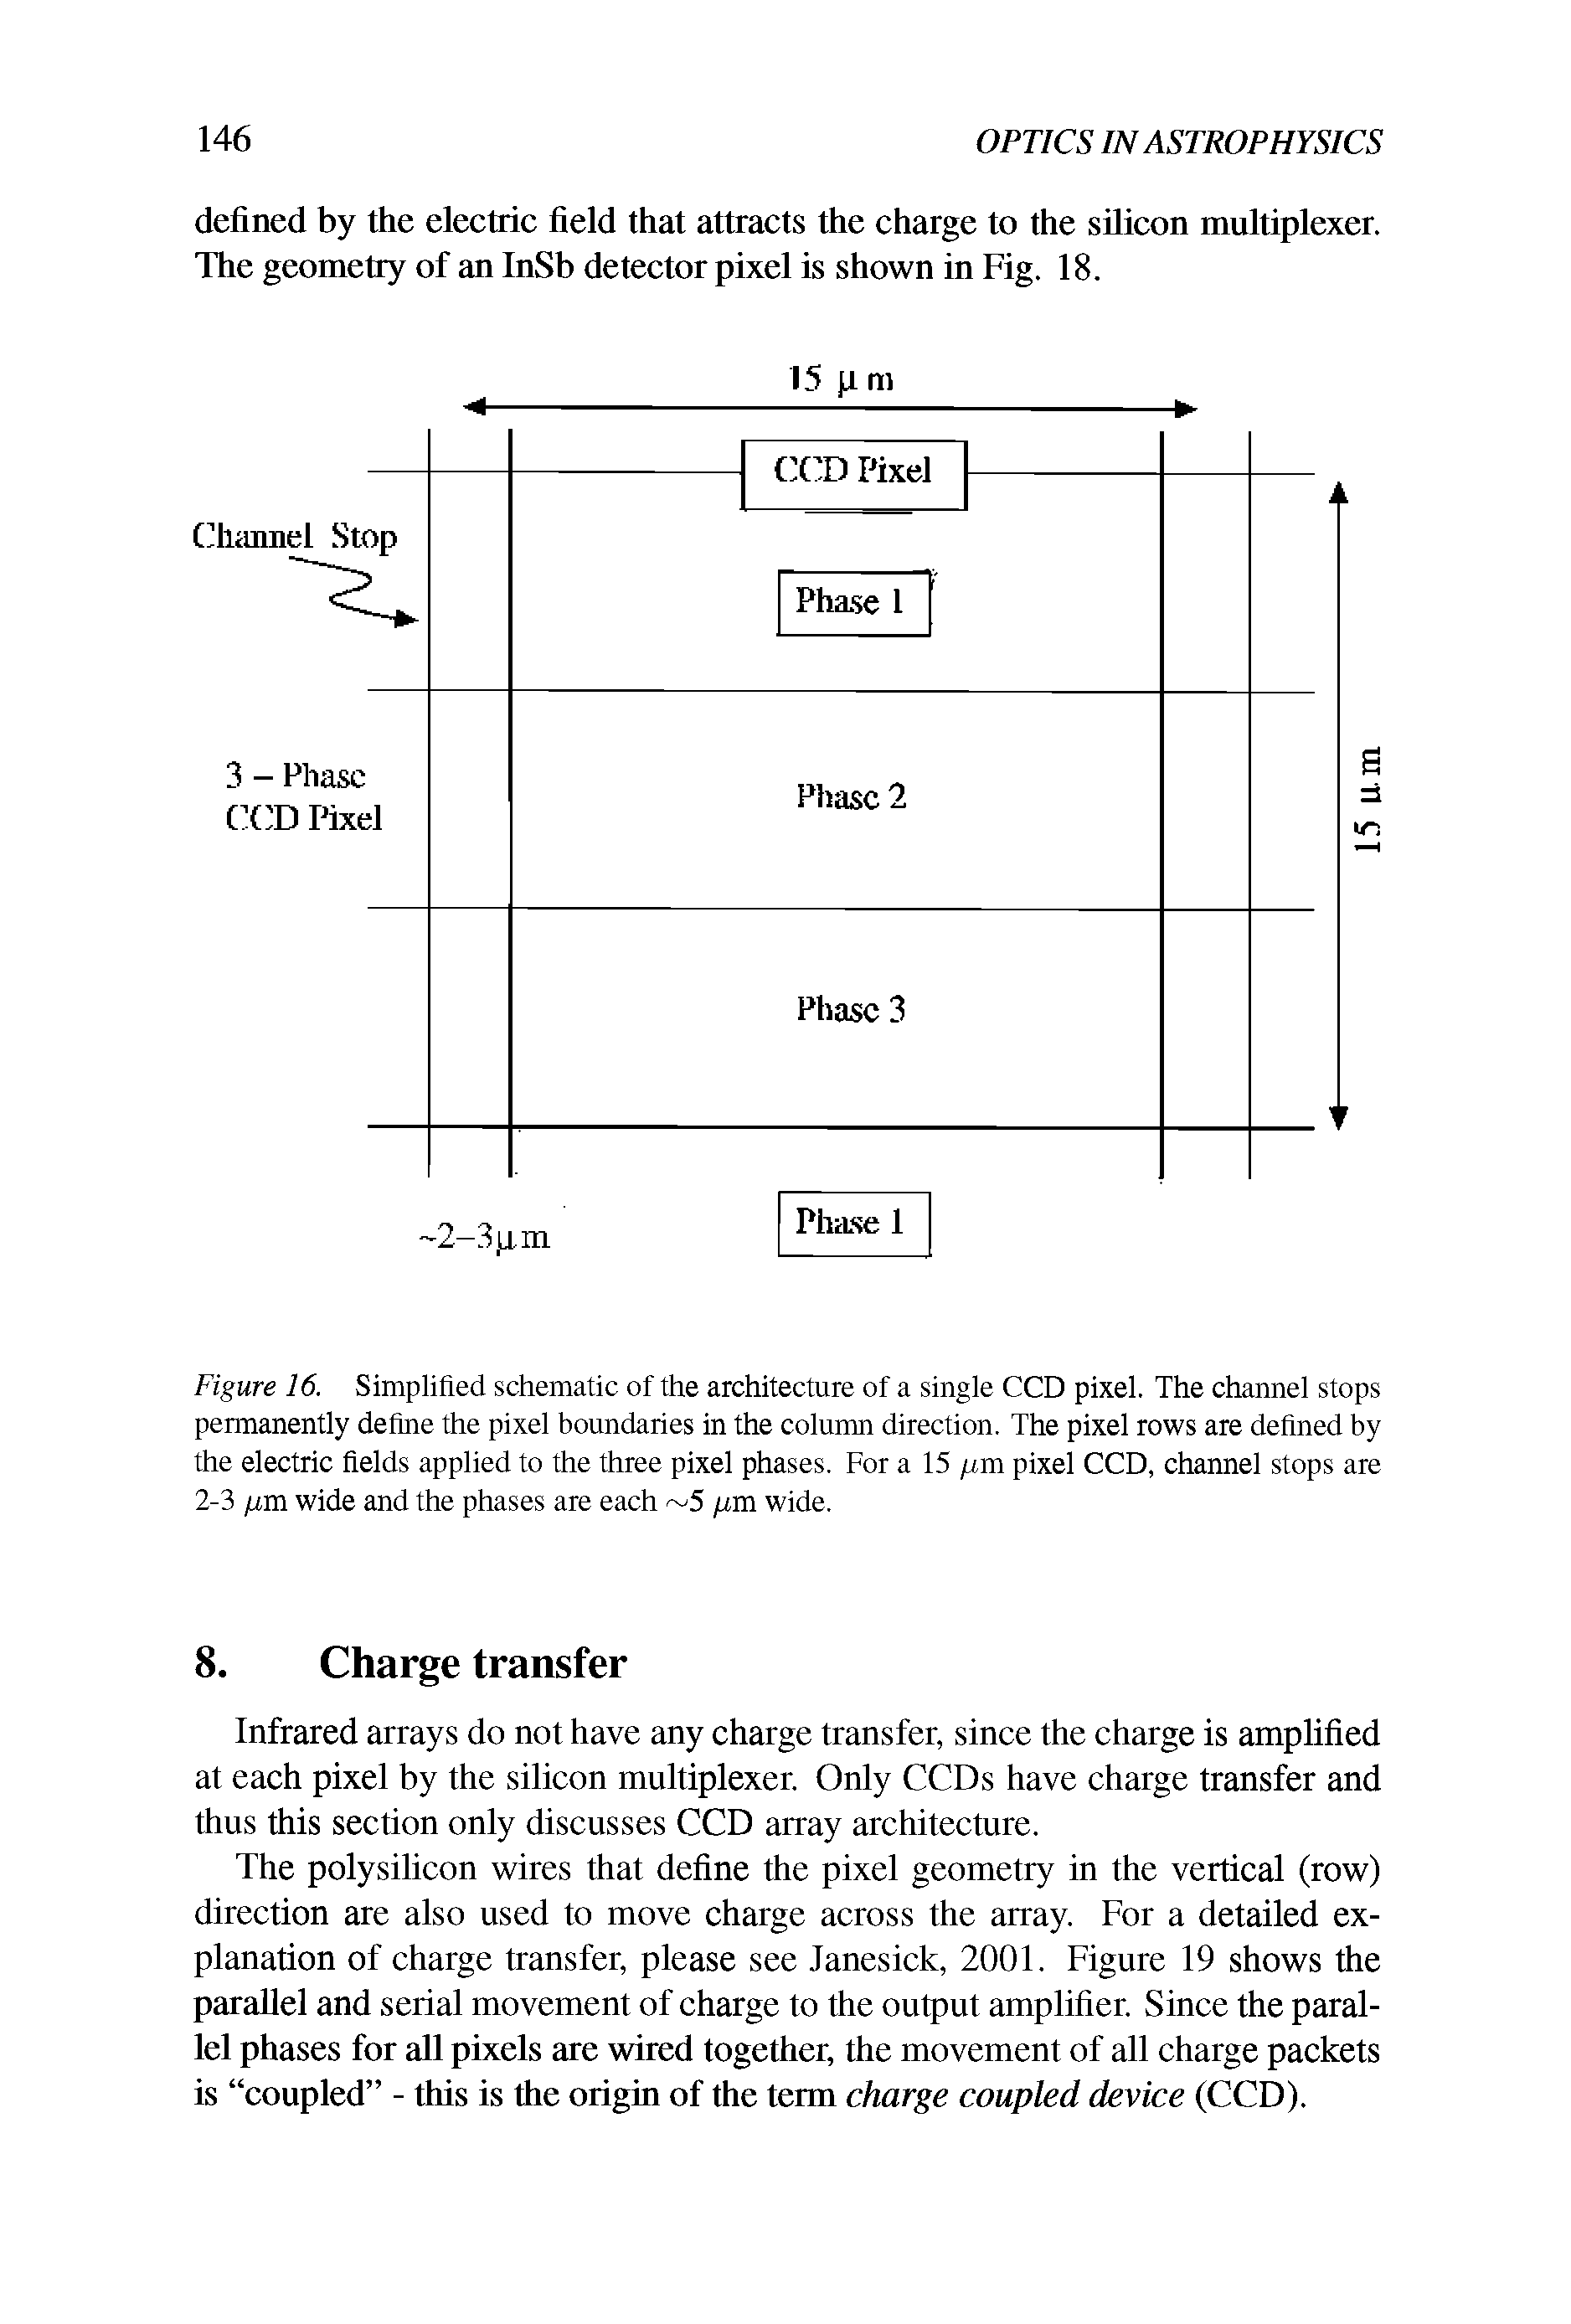 Figure 16. Simplified schematic of the architecture of a single CCD pixel. The channel stops permanently define the pixel boundaries in the column direction. The pixel rows are defined by the electric fields applied to the three pixel phases. For a 15 /urn pixel CCD, channel stops are 2-3 /um wide and the phases are each 5 /um wide.